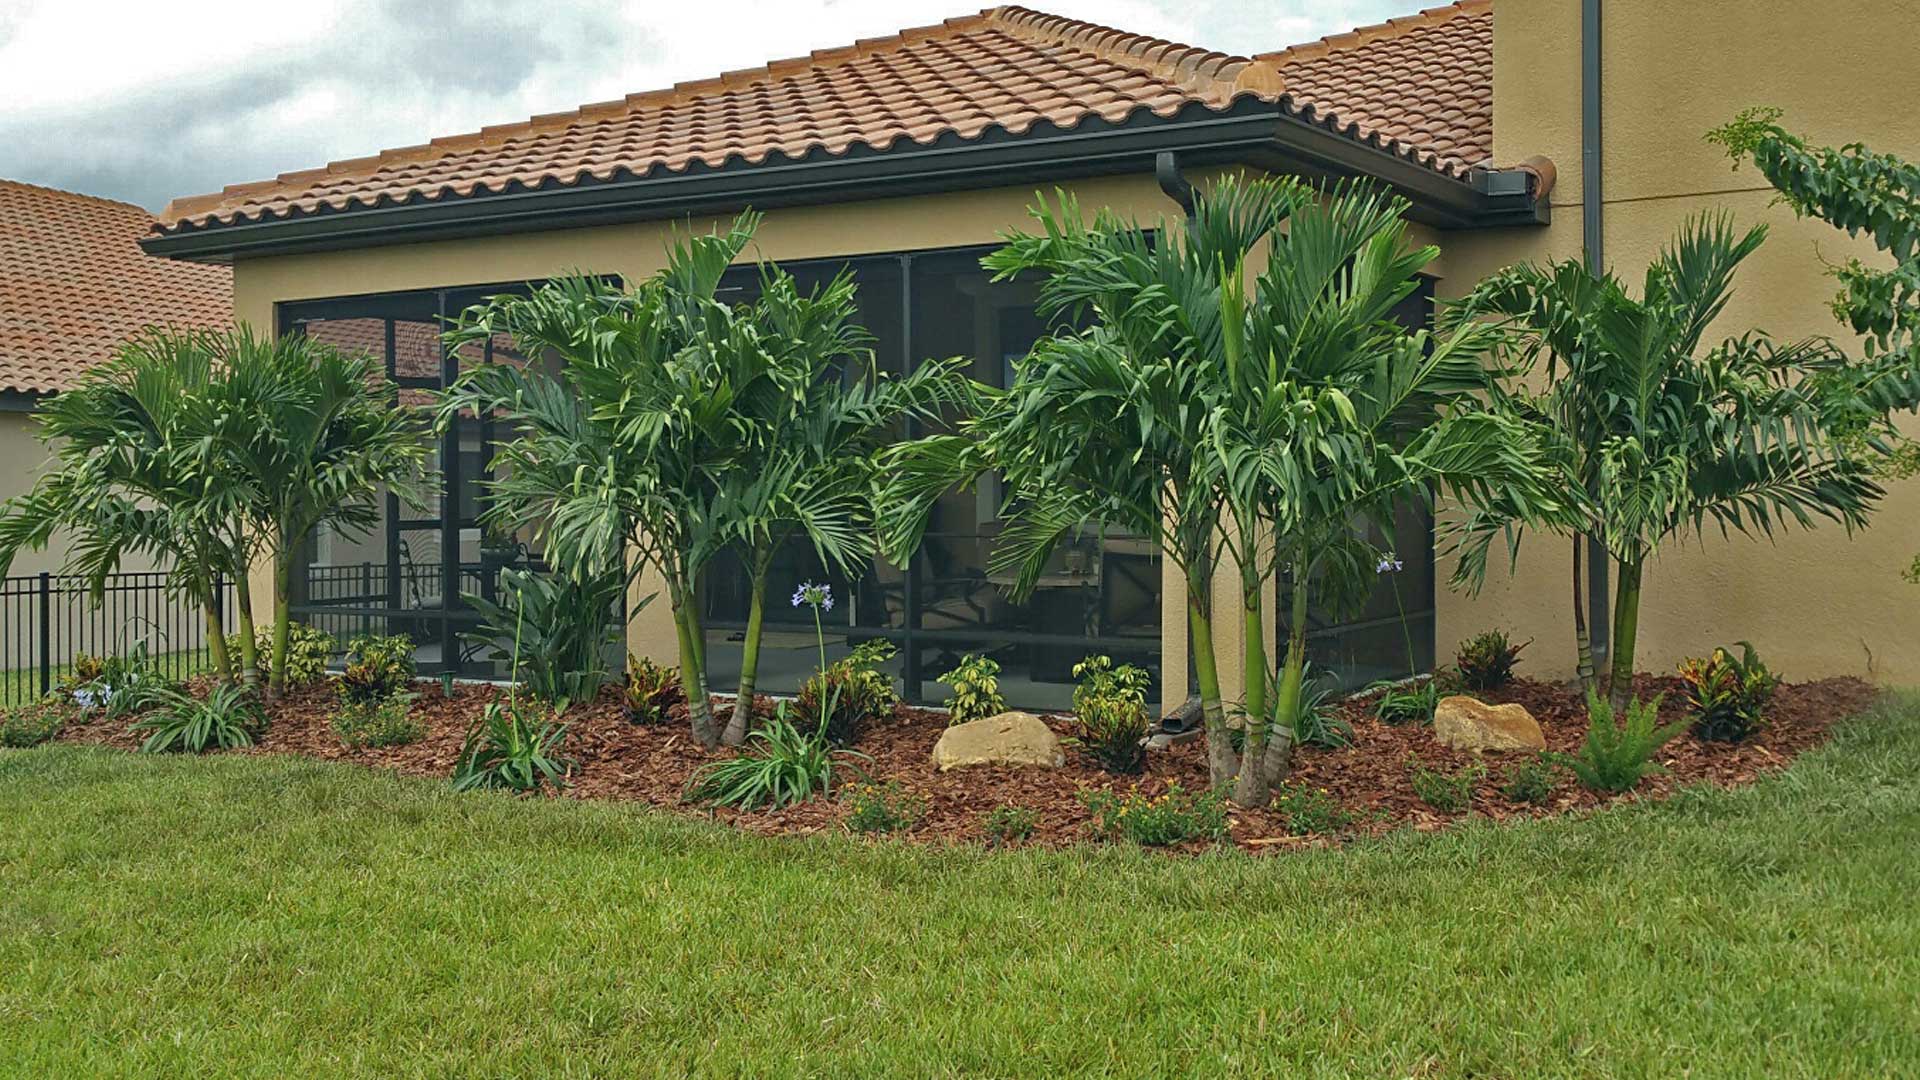 Our landscaping service area around Lakeland, FL.